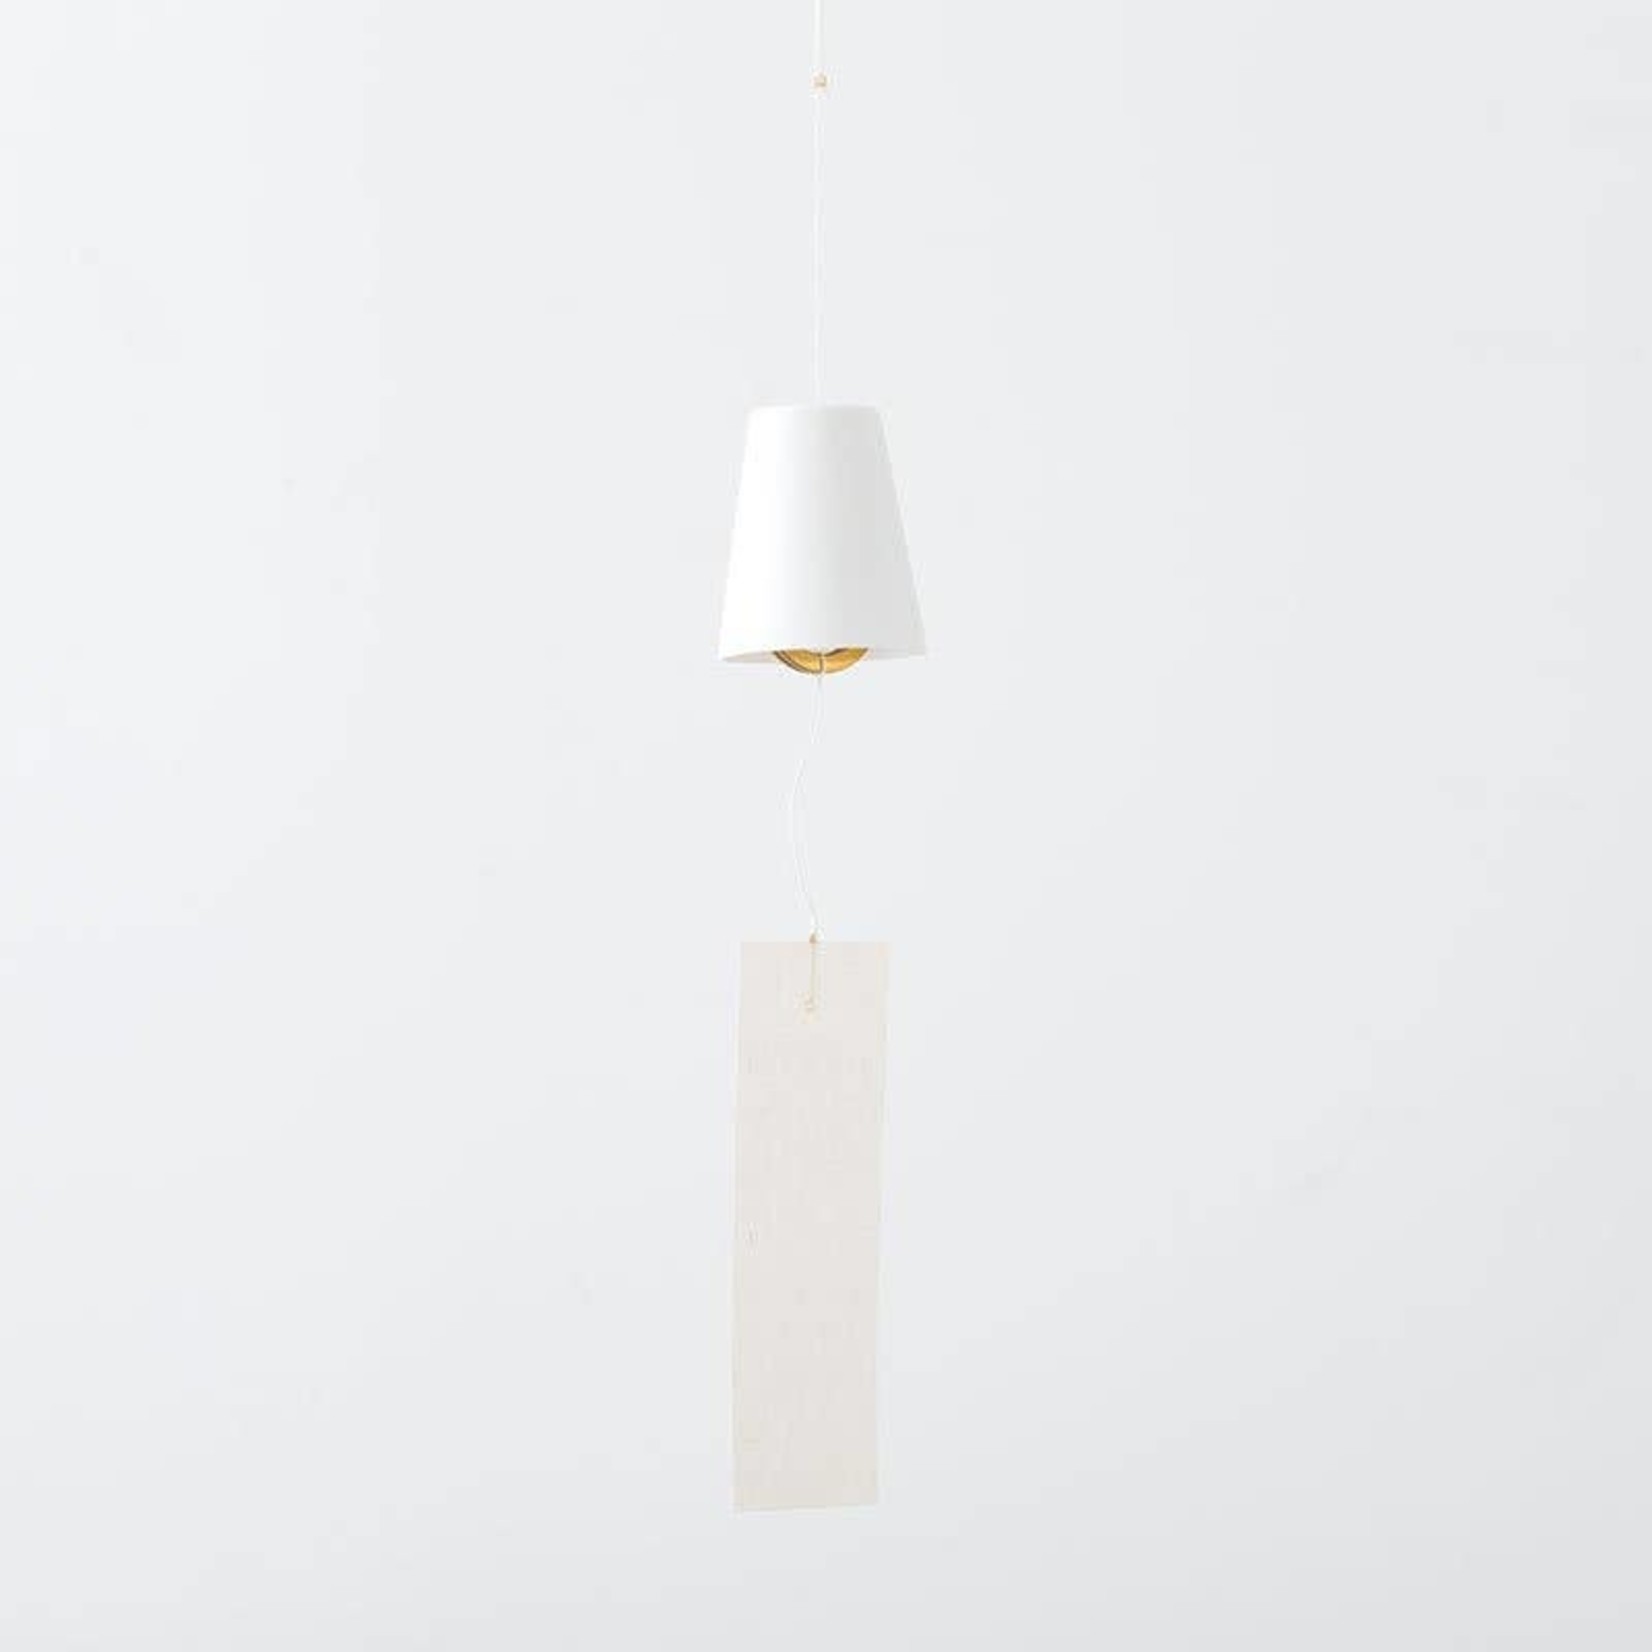 Japacolle Simple Wind Chime